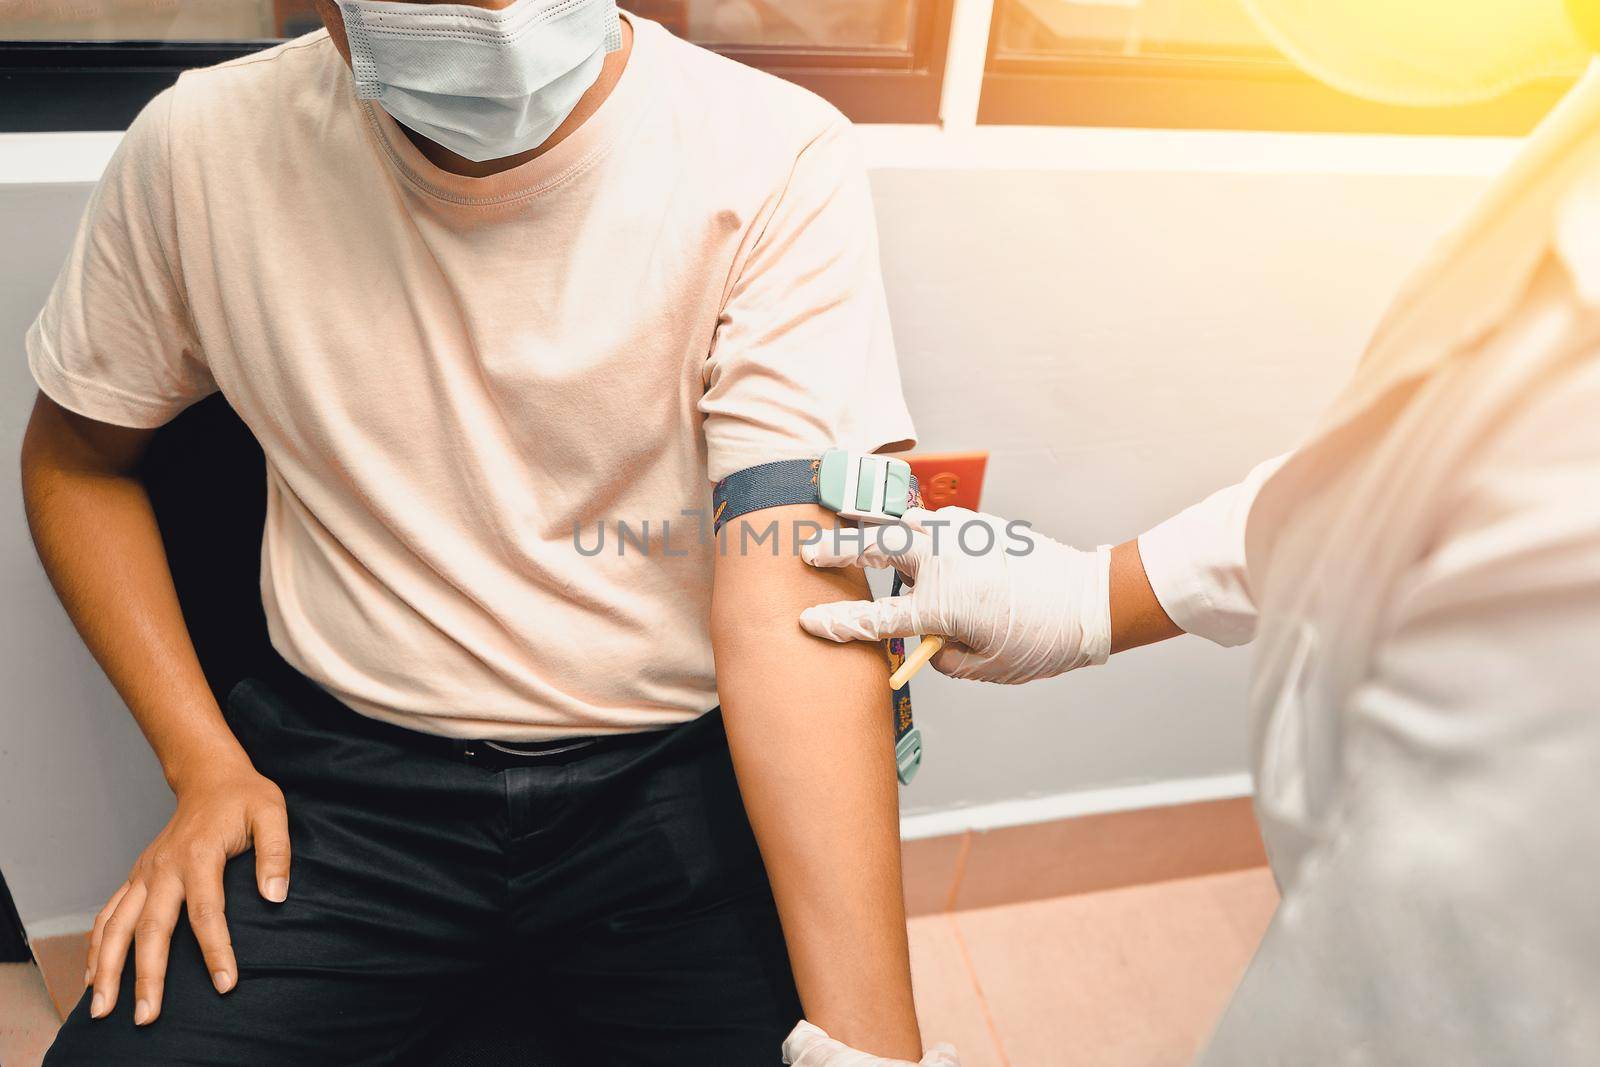 Unrecognizable young Latin man having a blood sample taken in a hospital